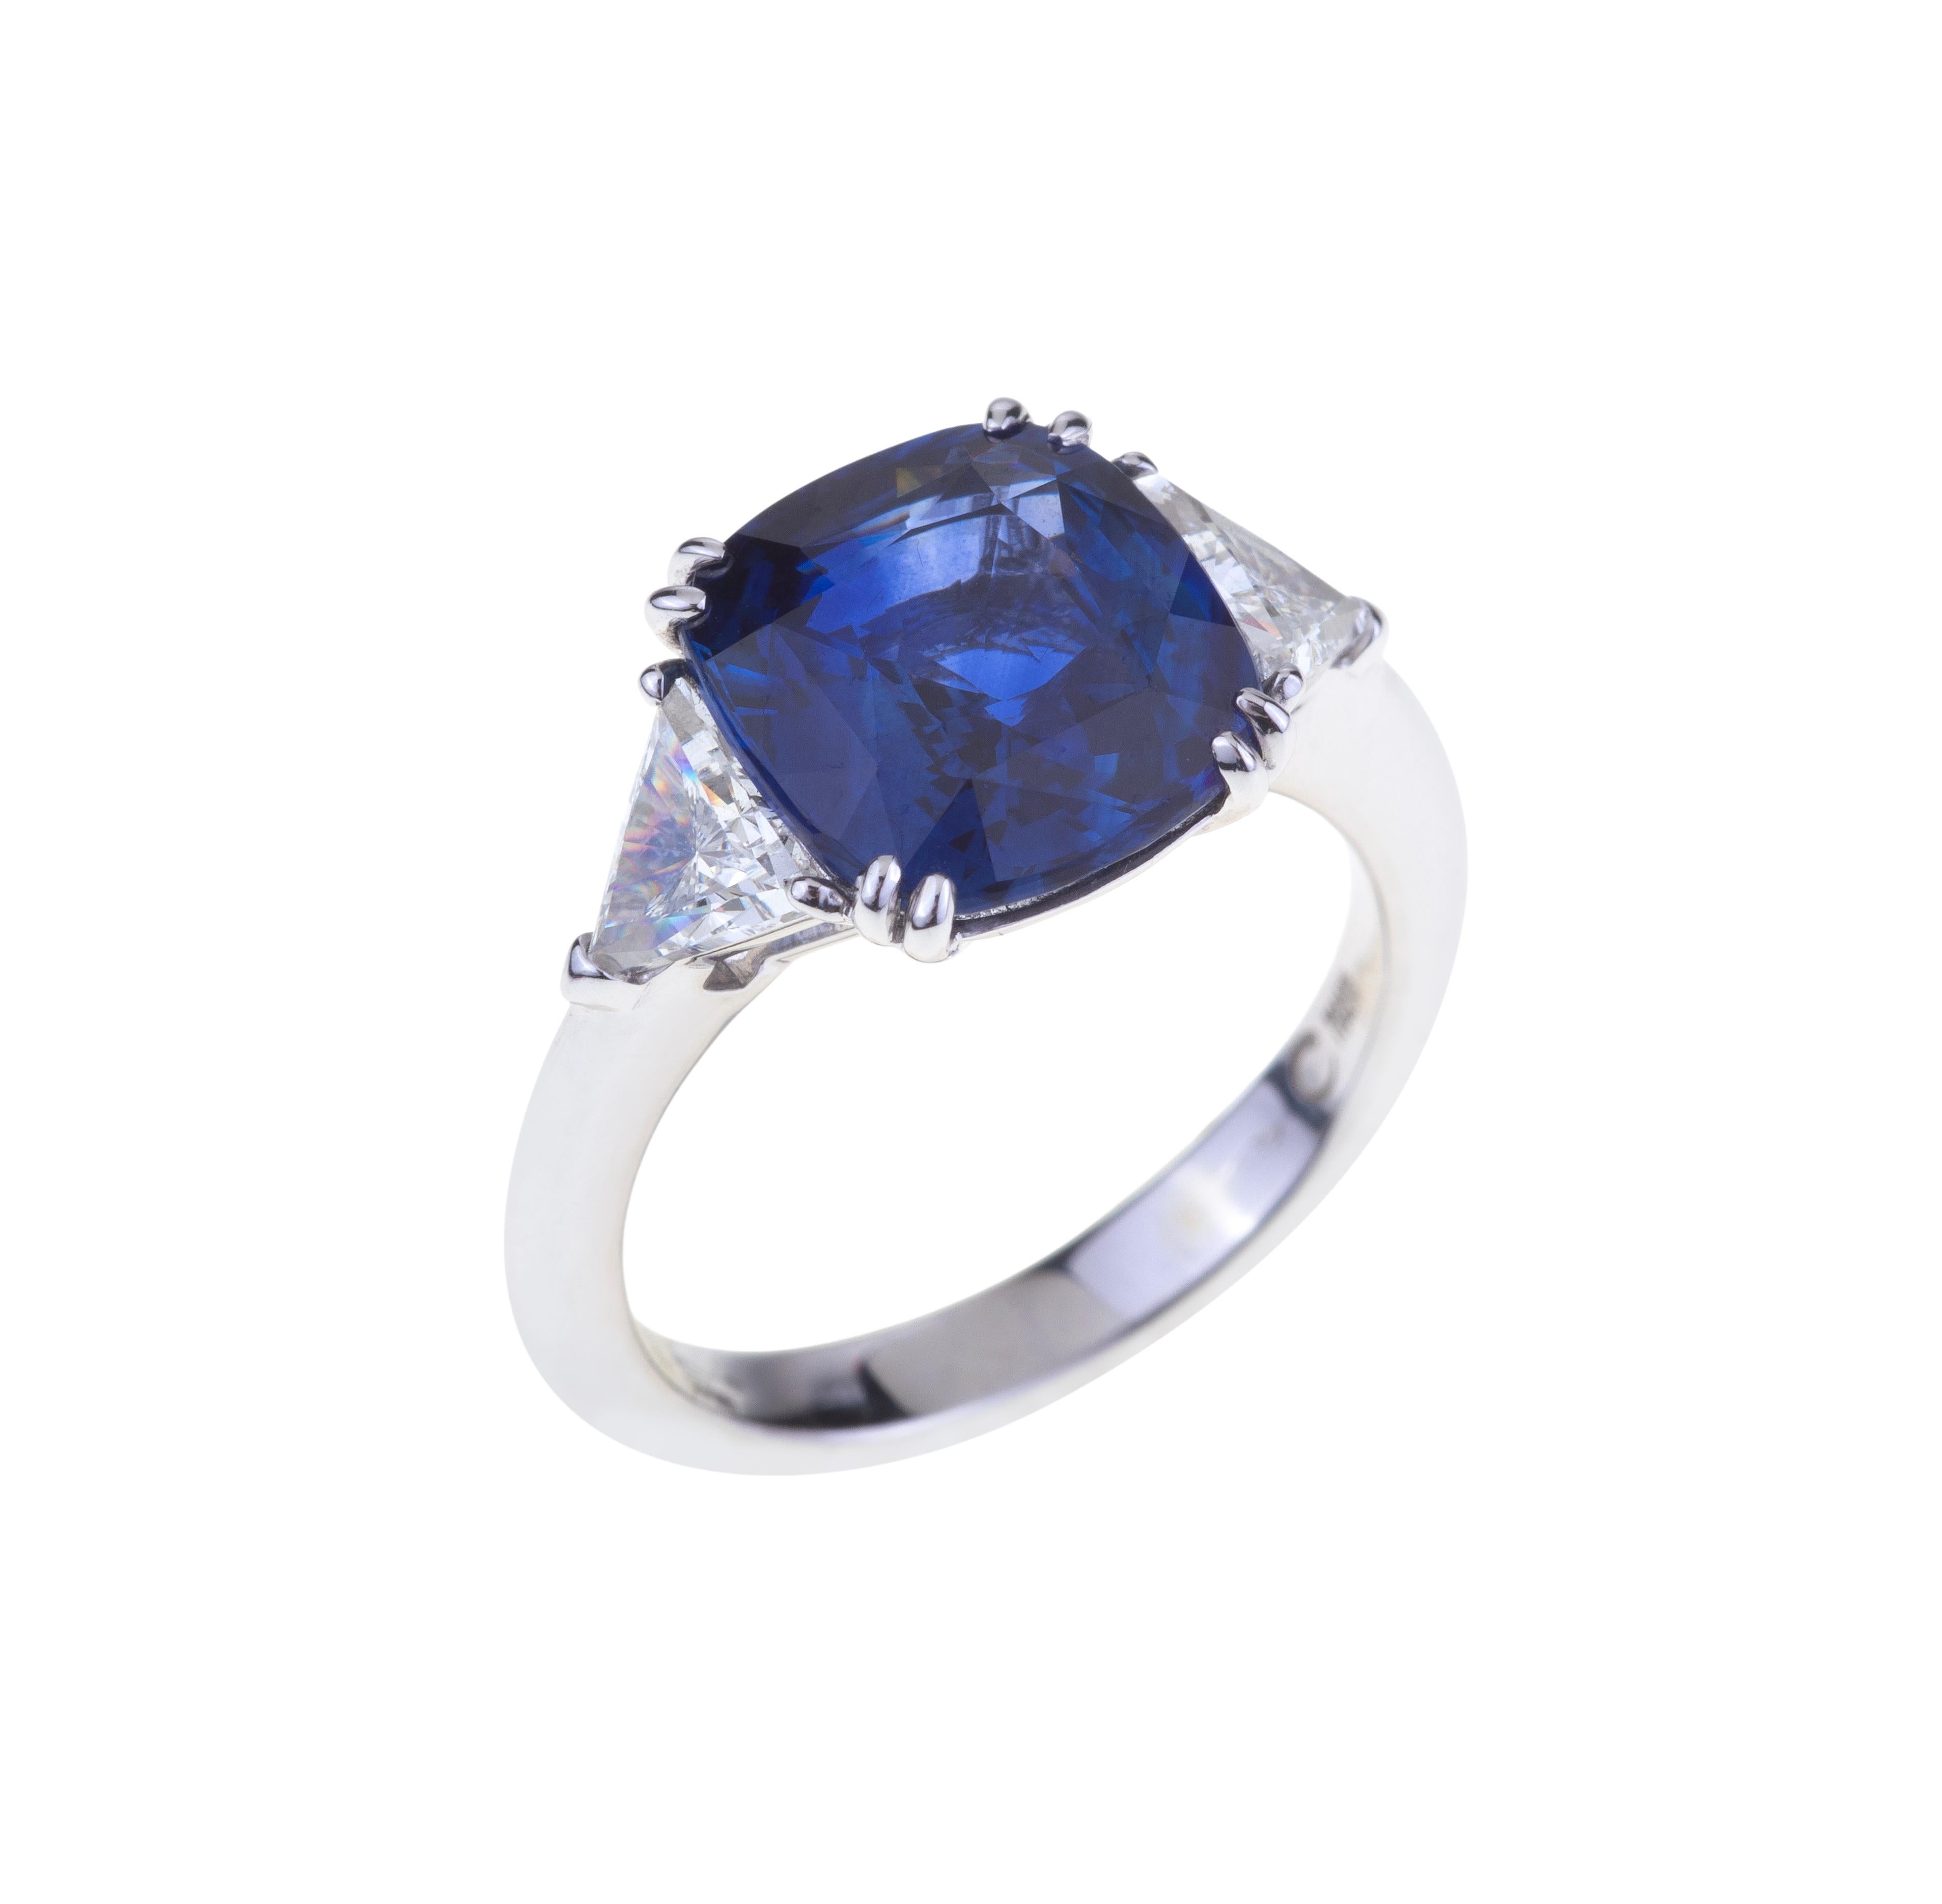 Stunning Oval Blue Sapphires Ring ct. 5.35 Certificate with Diamonds.
Classic Design for this Ring with a Stunning Blue Sapphire (ct. 5.35 ) with Diamonds on the side (ct. 0.83  F-SI). The weight of 18kt Gold is 4.50.
Designed in Italy.
Angeletti